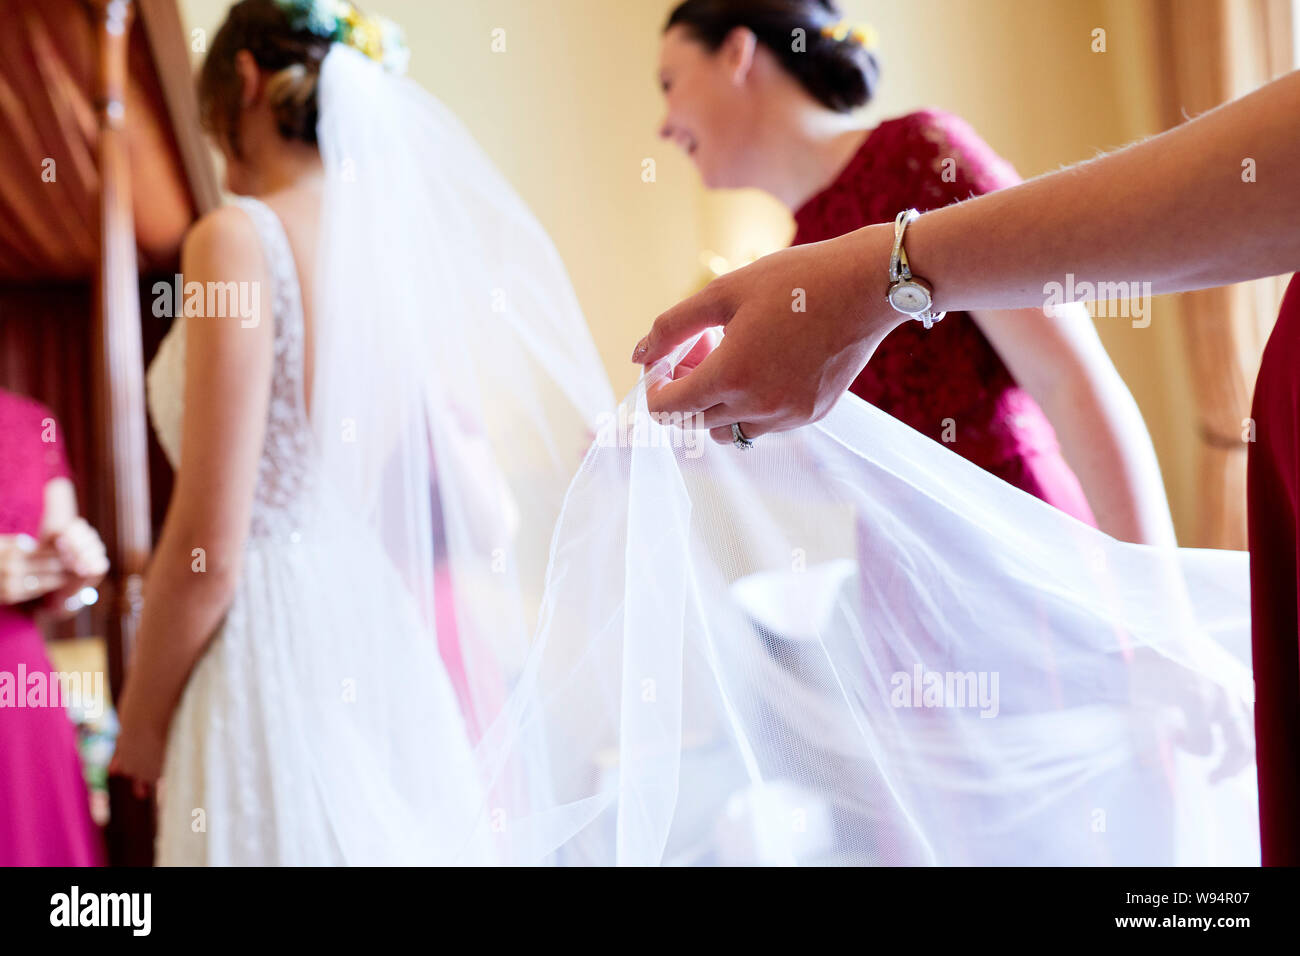 Bride getting ready before her wedding Stock Photo